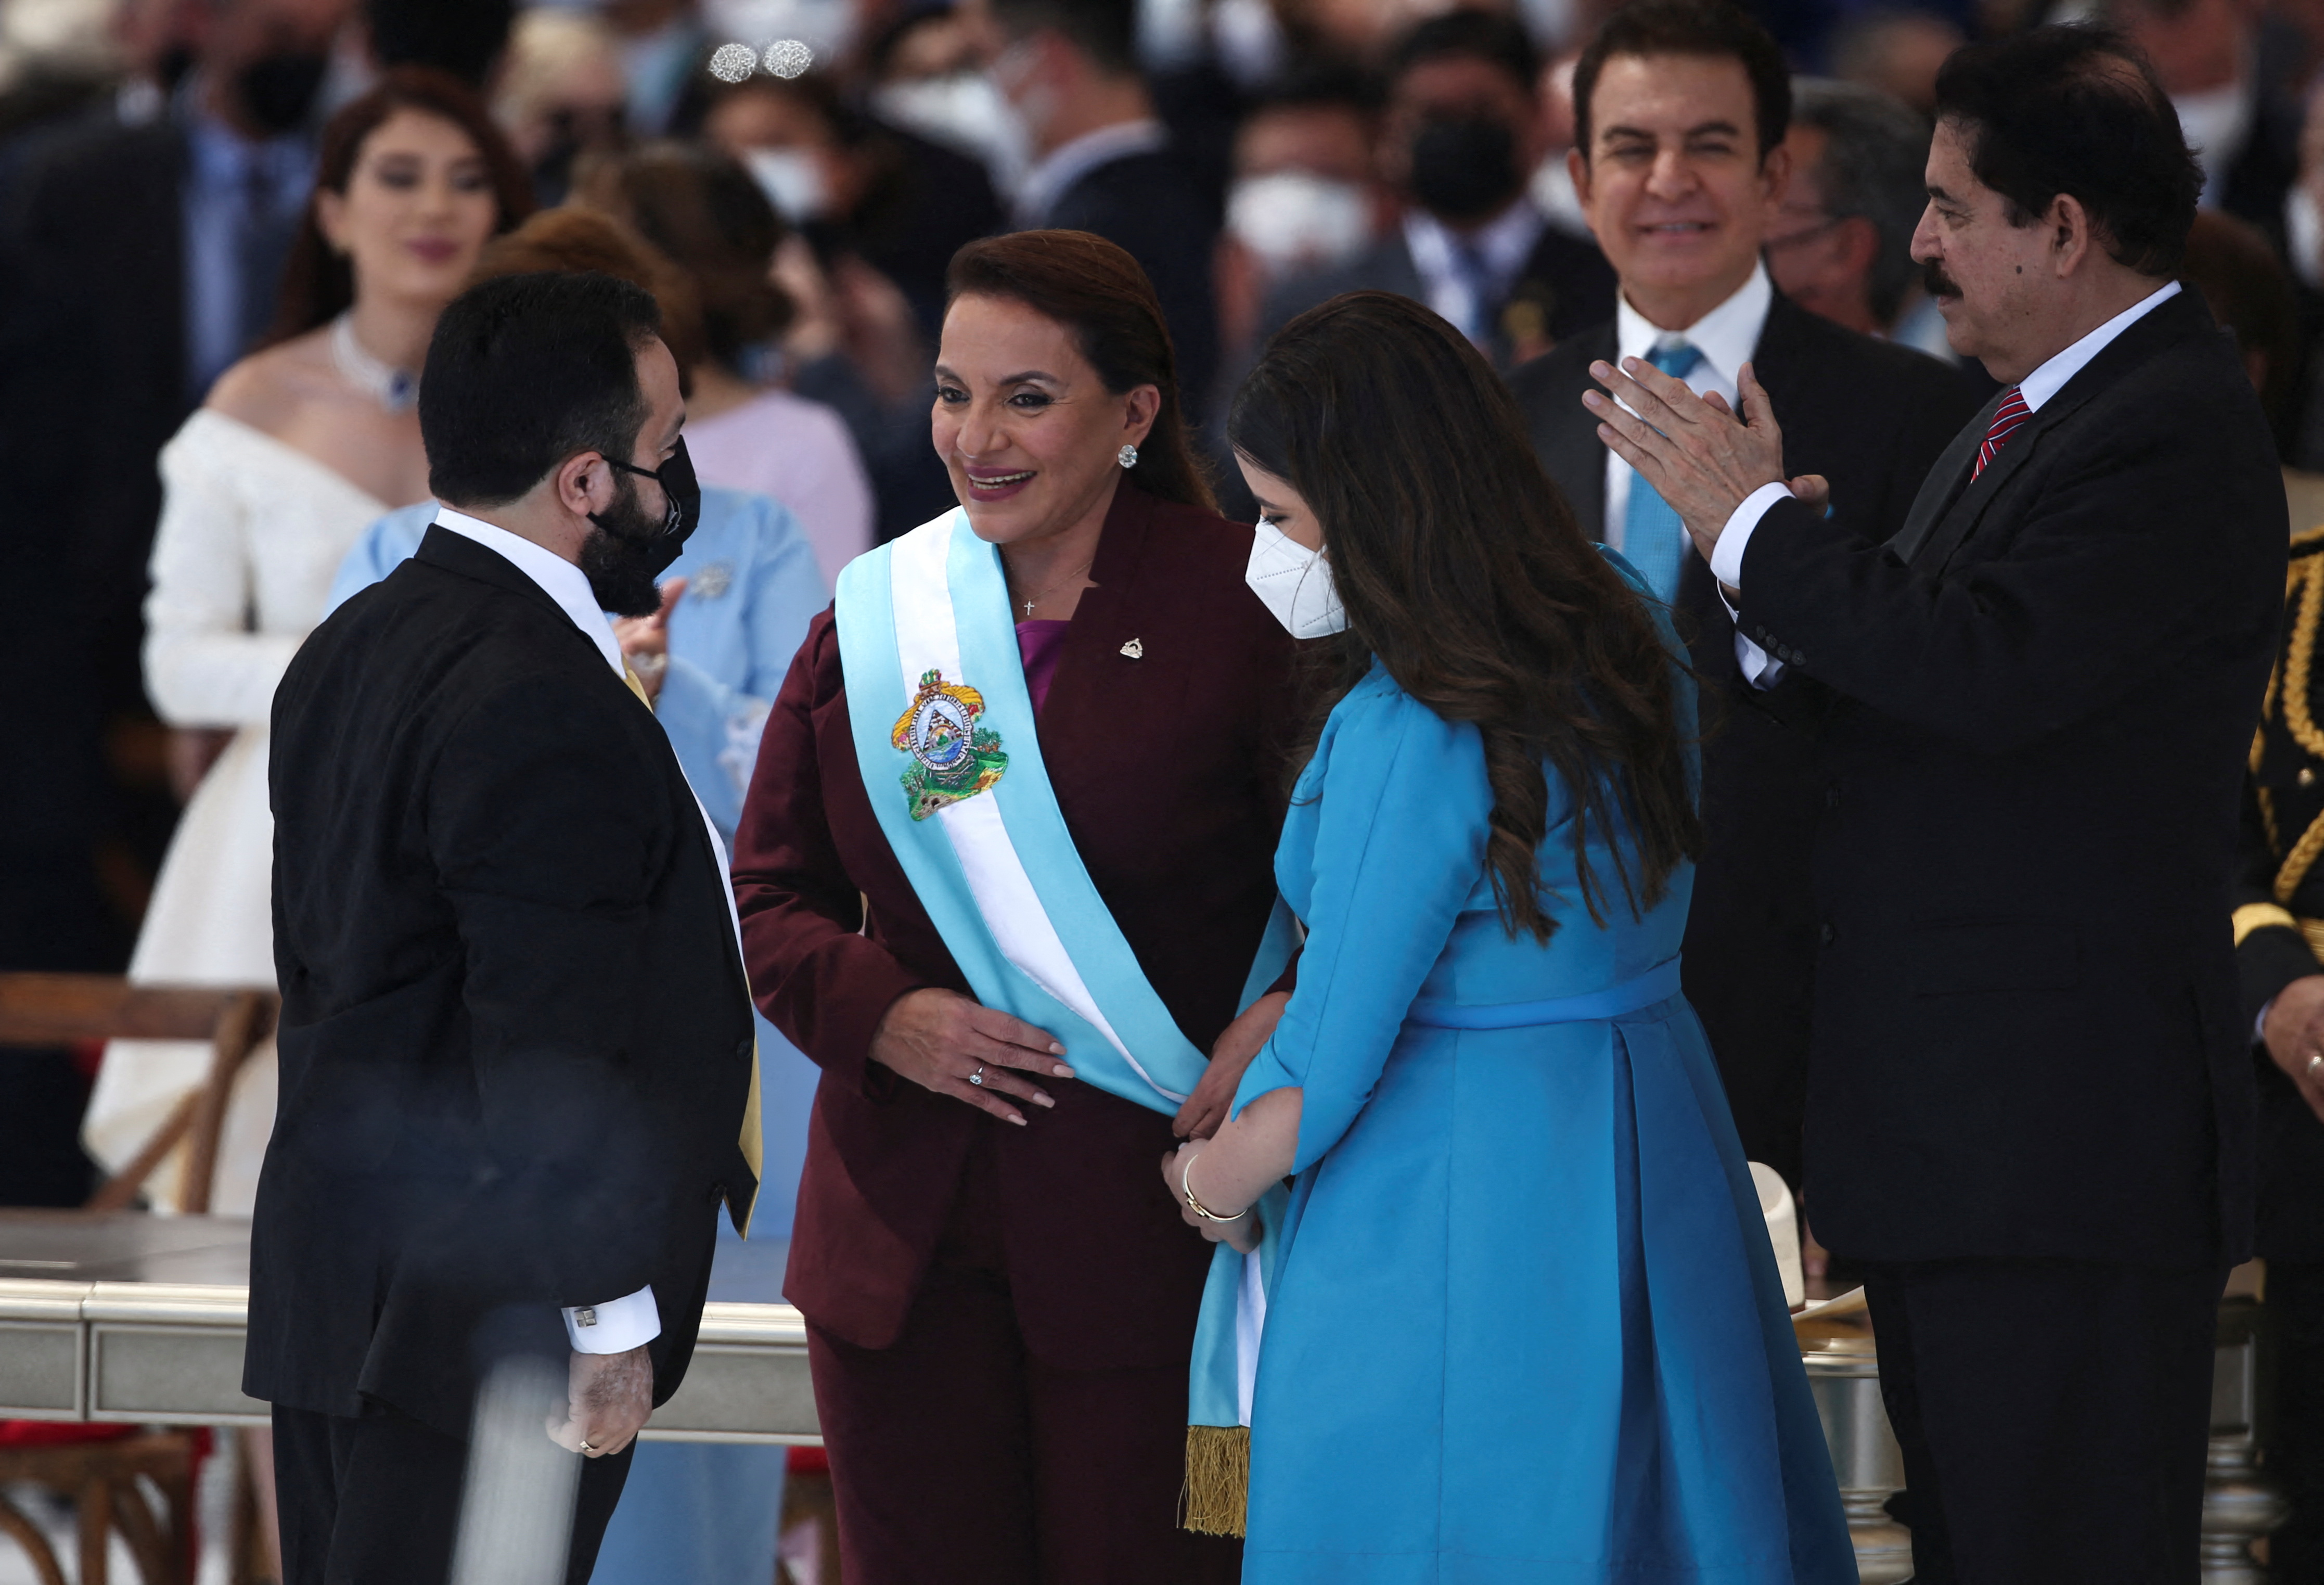 New Honduran President Xiomara Castro receives the presidential sash from her granddaughter, Irene Melara, and the President of the Congress Luis Redondo, during a swearing-in ceremony in Tegucigalpa, Honduras January 27, 2022. REUTERS/Jose Cabezas